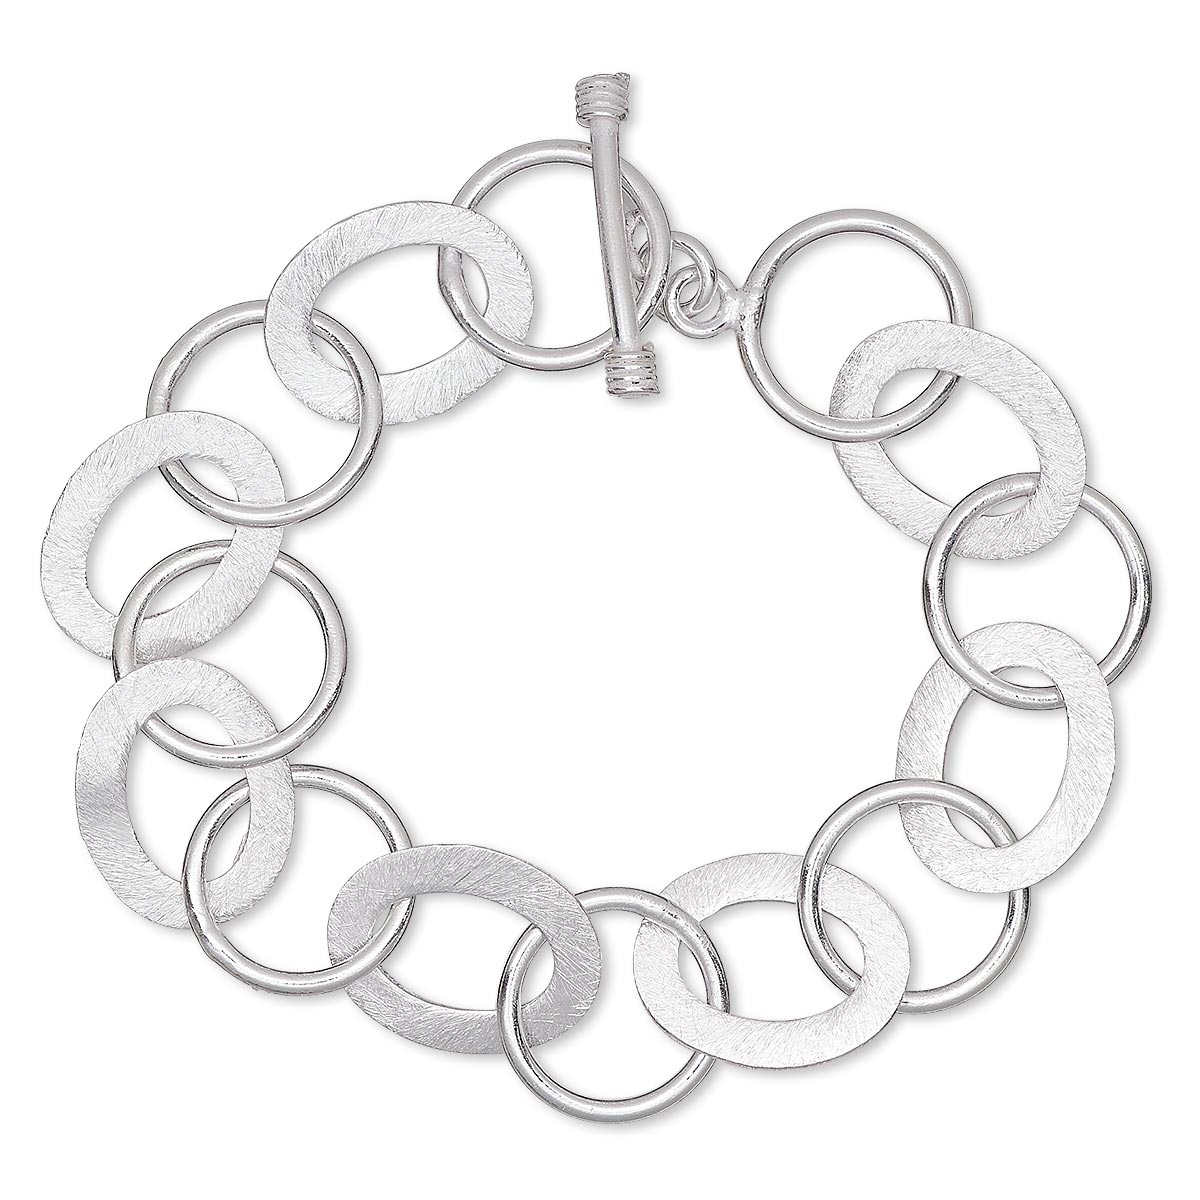 Bracelet, silver-plated copper, 15mm smooth open round and 18x14mm